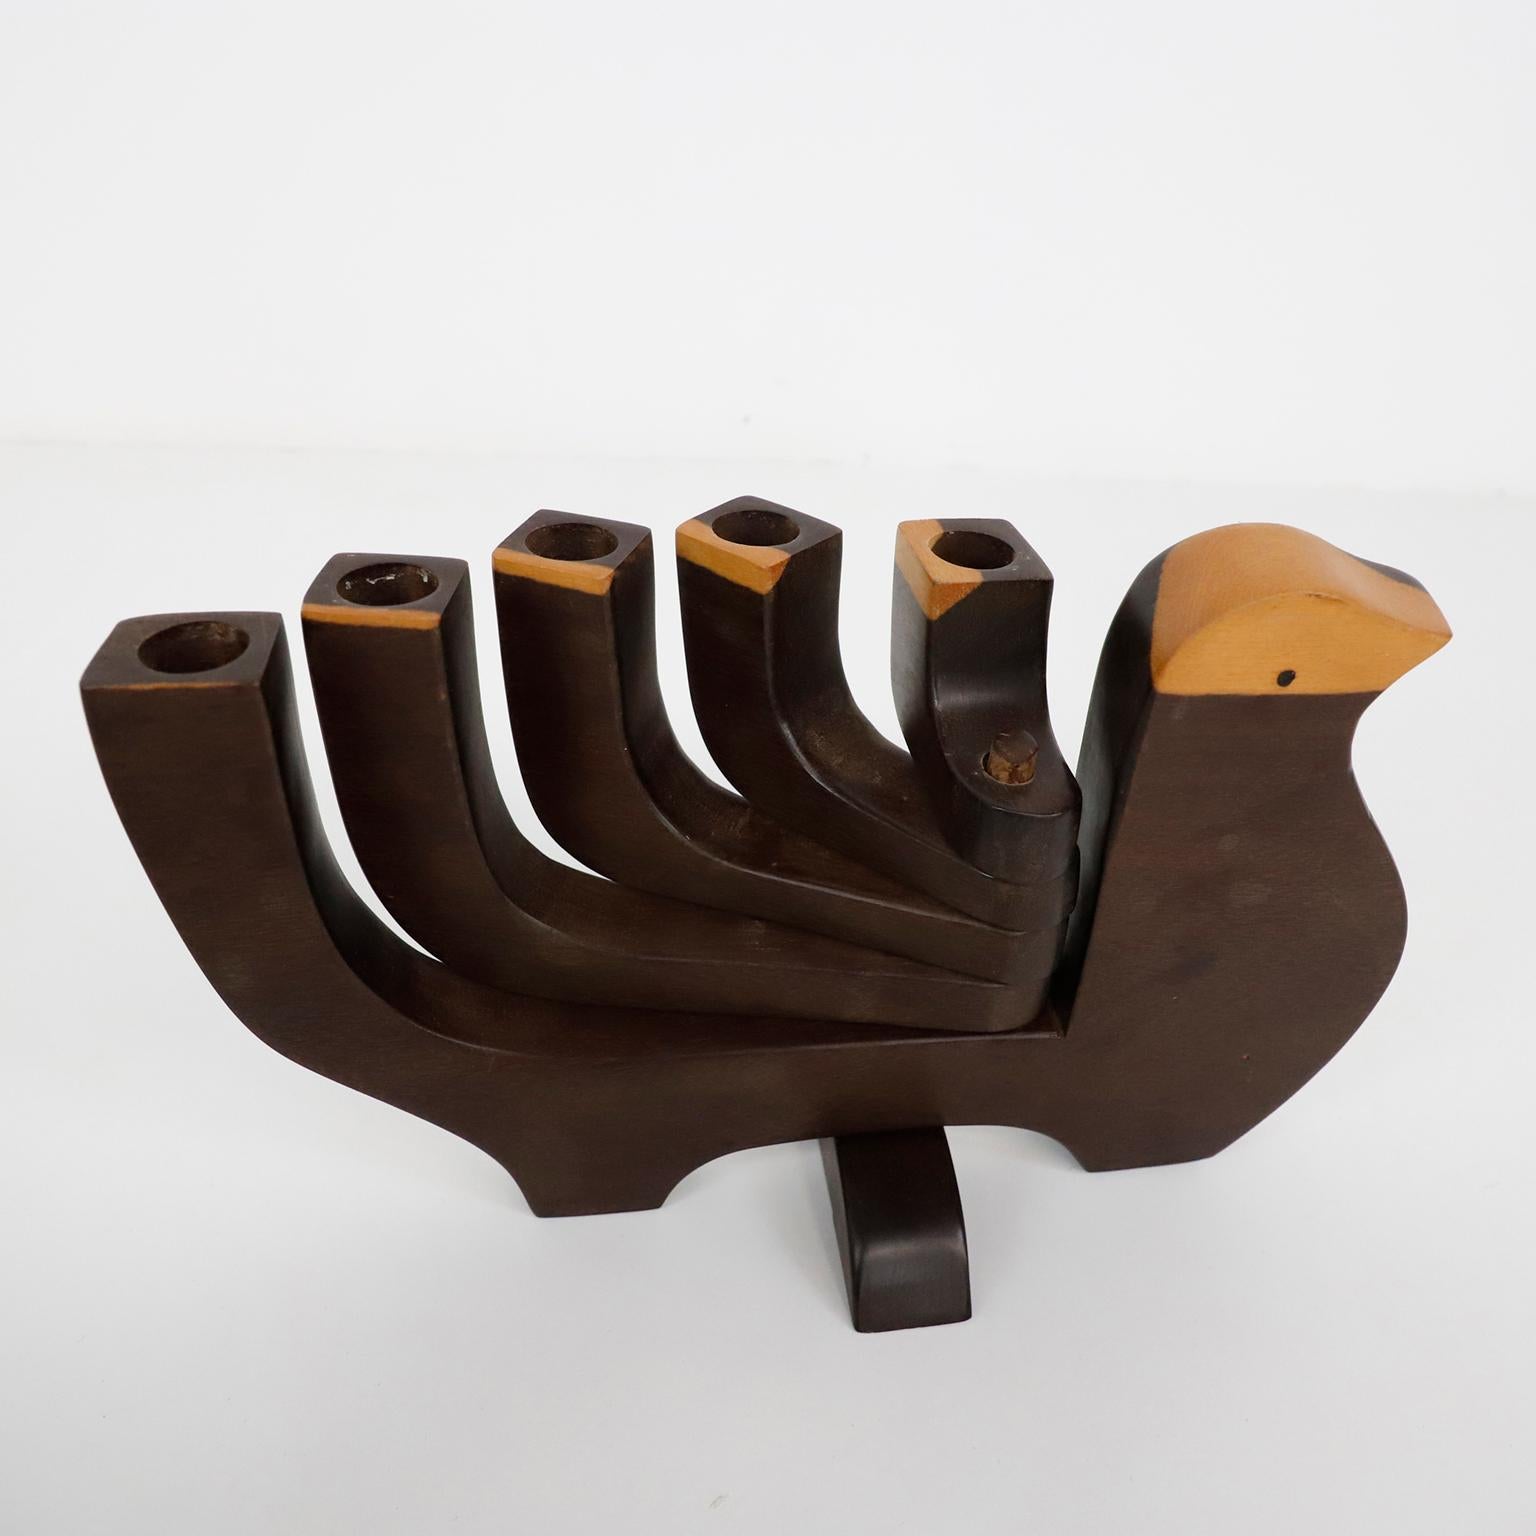 Circa 1960, we offer this Mexican mid century 5 candle holder made in Katalox (tropical wood). This is a great bird shaped adjustable candle holder that holds 5 thin taper candles.